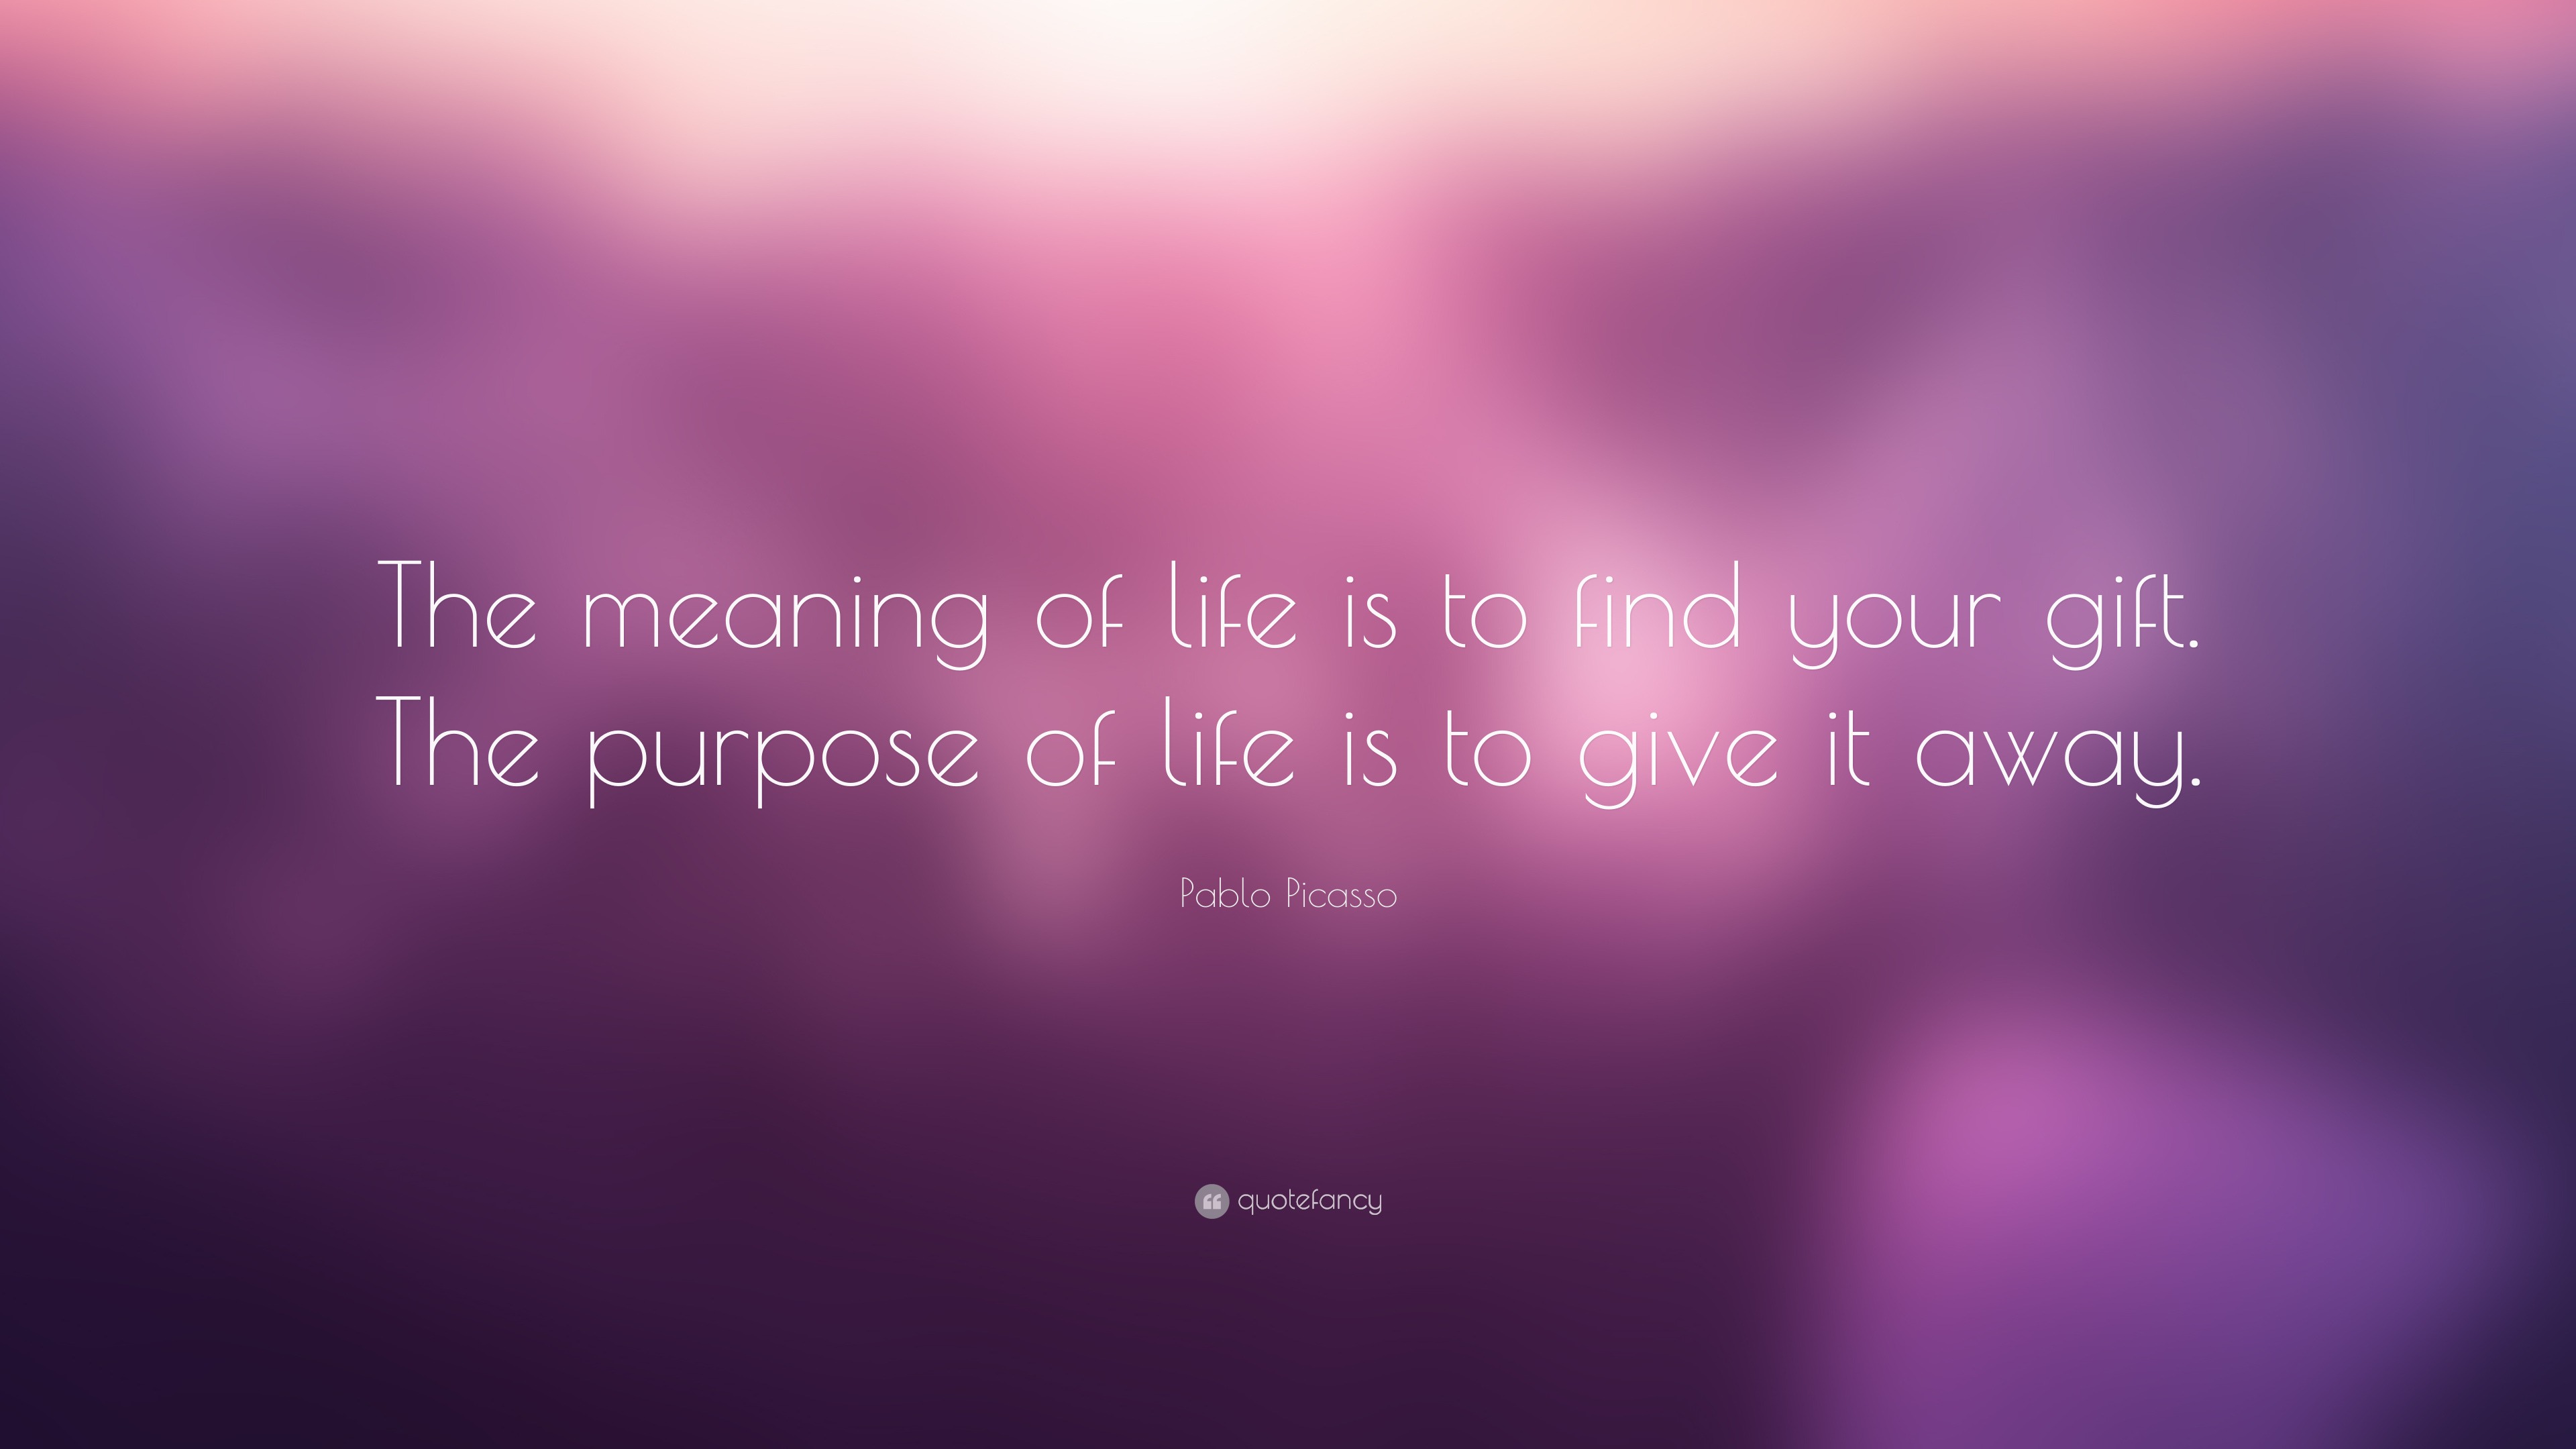 Pablo Picasso Quote: "The meaning of life is to find your ...